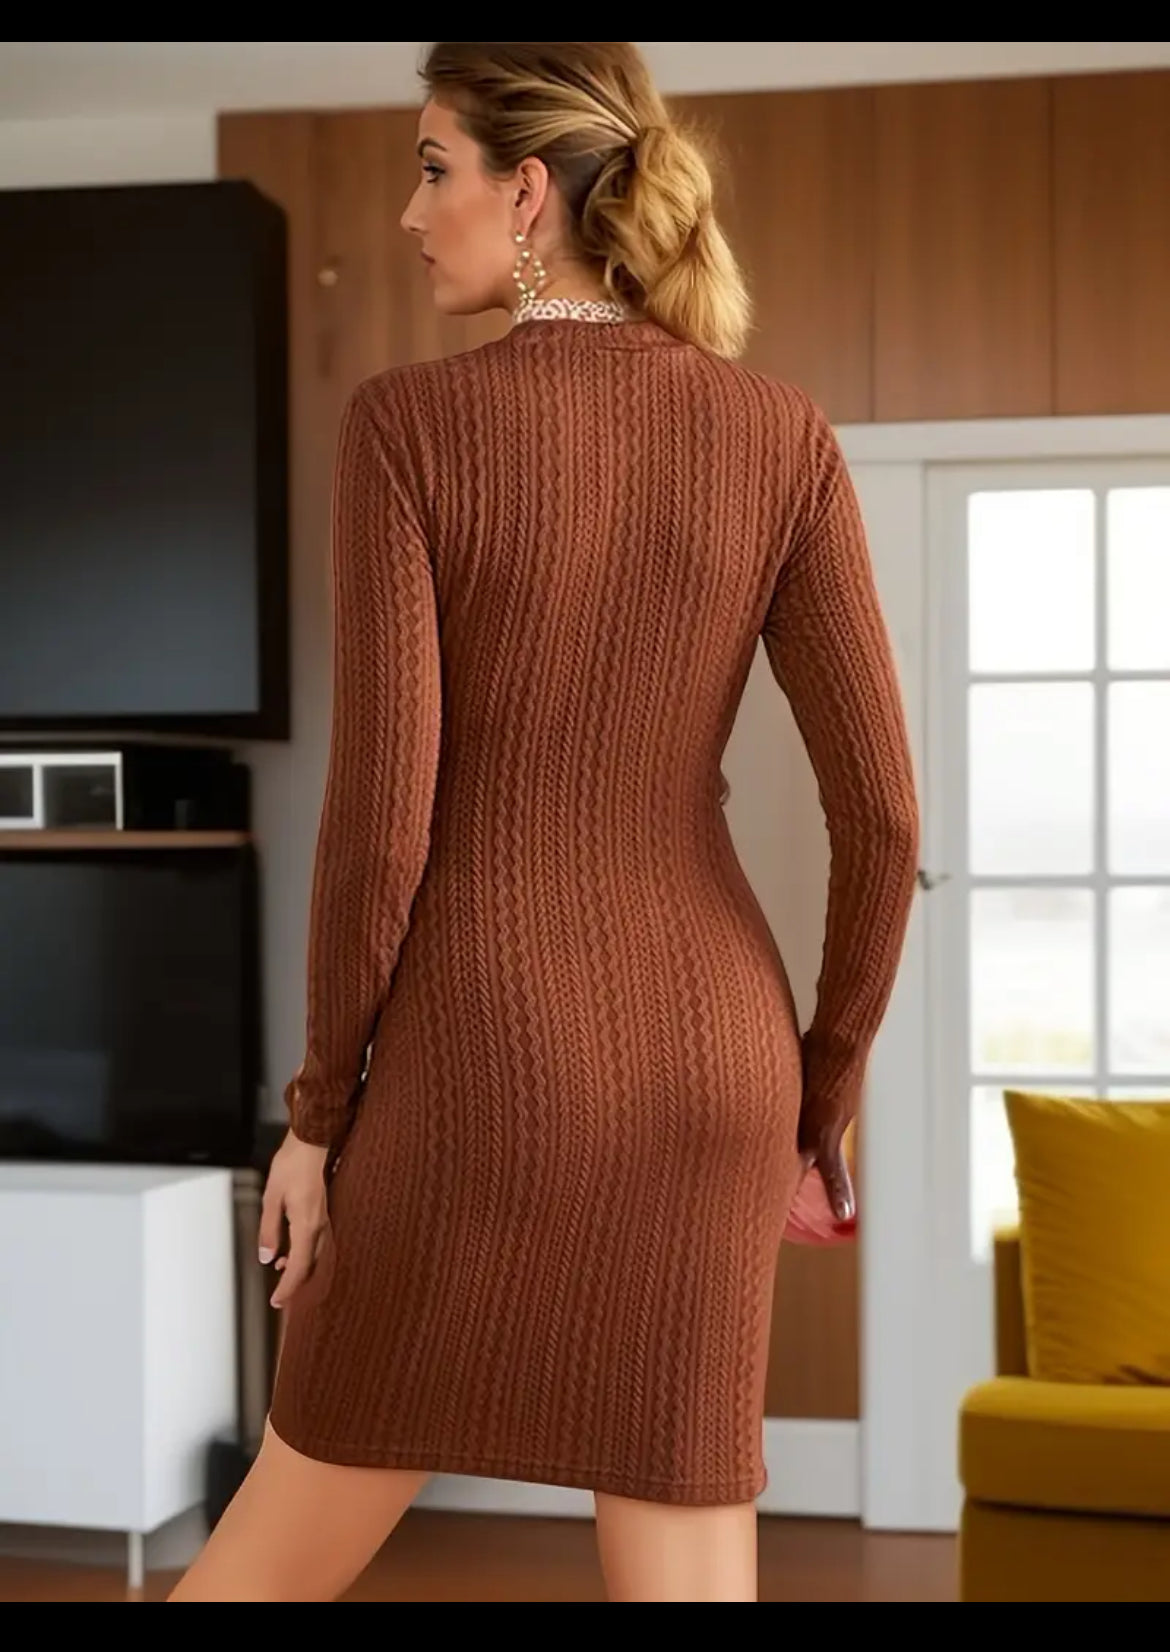 Women's Maternity Elegant Knitted Dress, Long Sleeve Solid Crew Neck, Baby 🌙🌟 Bumps Maternity Collection